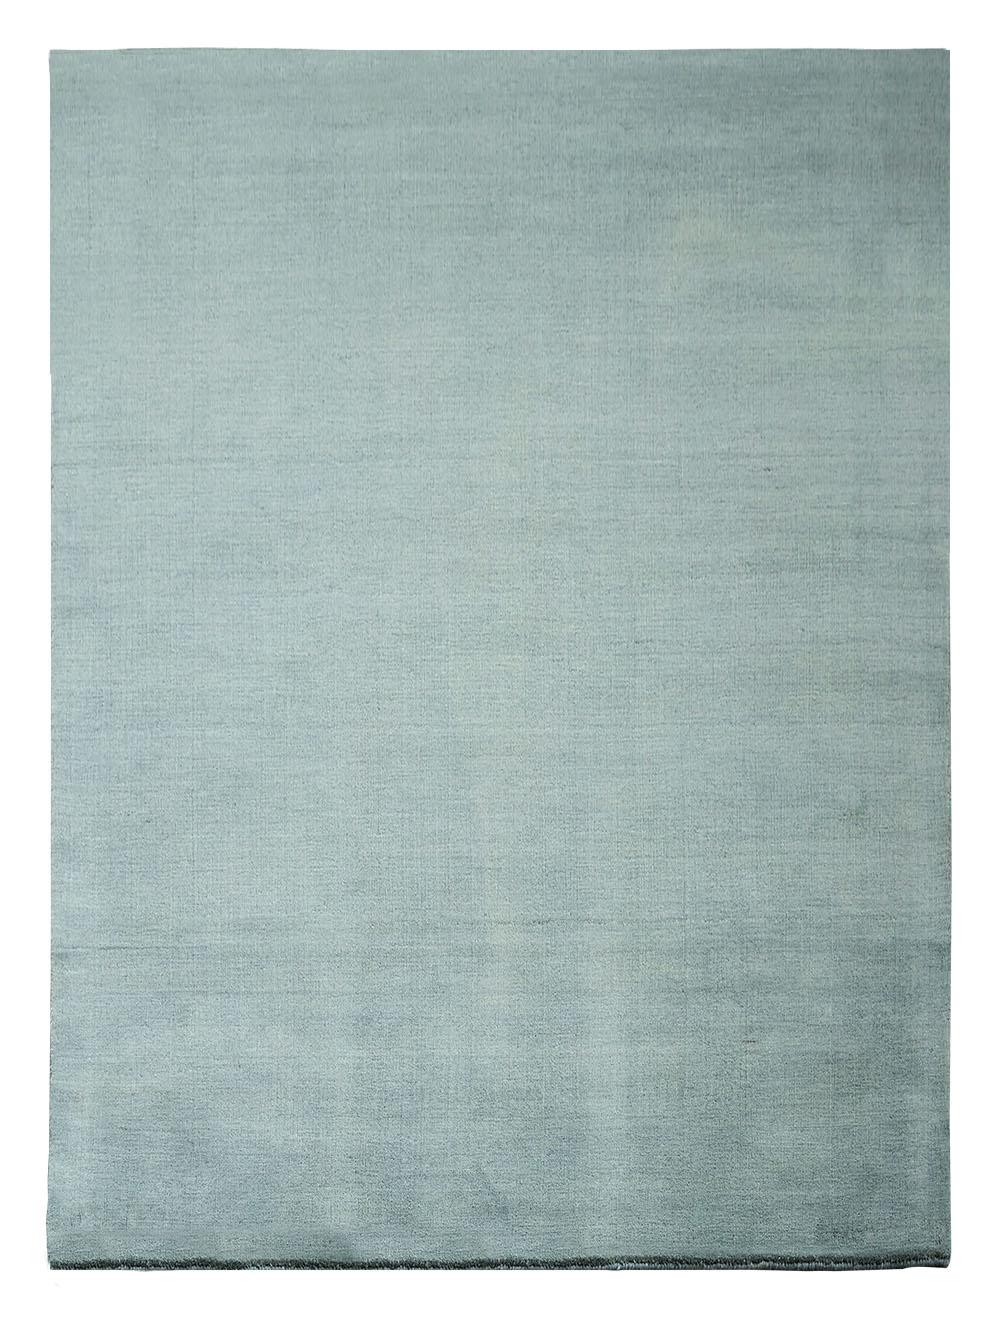 Verte Grey Earth Carpet by Massimo Copenhagen
Handwoven
Materials: 100% New Zealand Wool
Dimensions: W 300 x H 400 cm
Available colors: Verte Grey, Moss Green, Blush, Sea Green, and Charcoal.
Other dimensions are available: 140x200 cm, 170x240